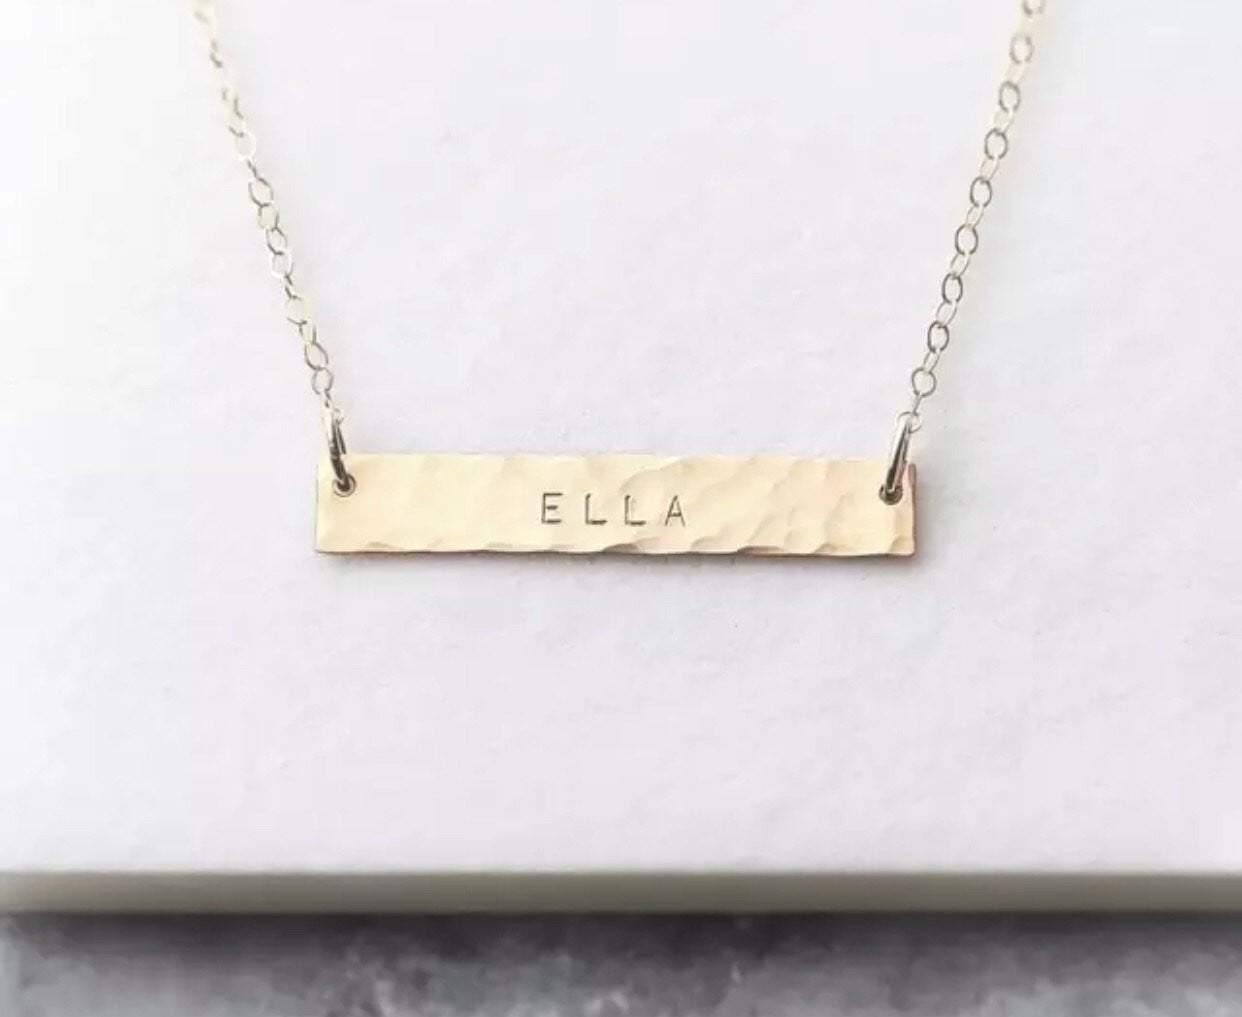 name-necklace -for-men-personalized-engraved-gift-jewelry